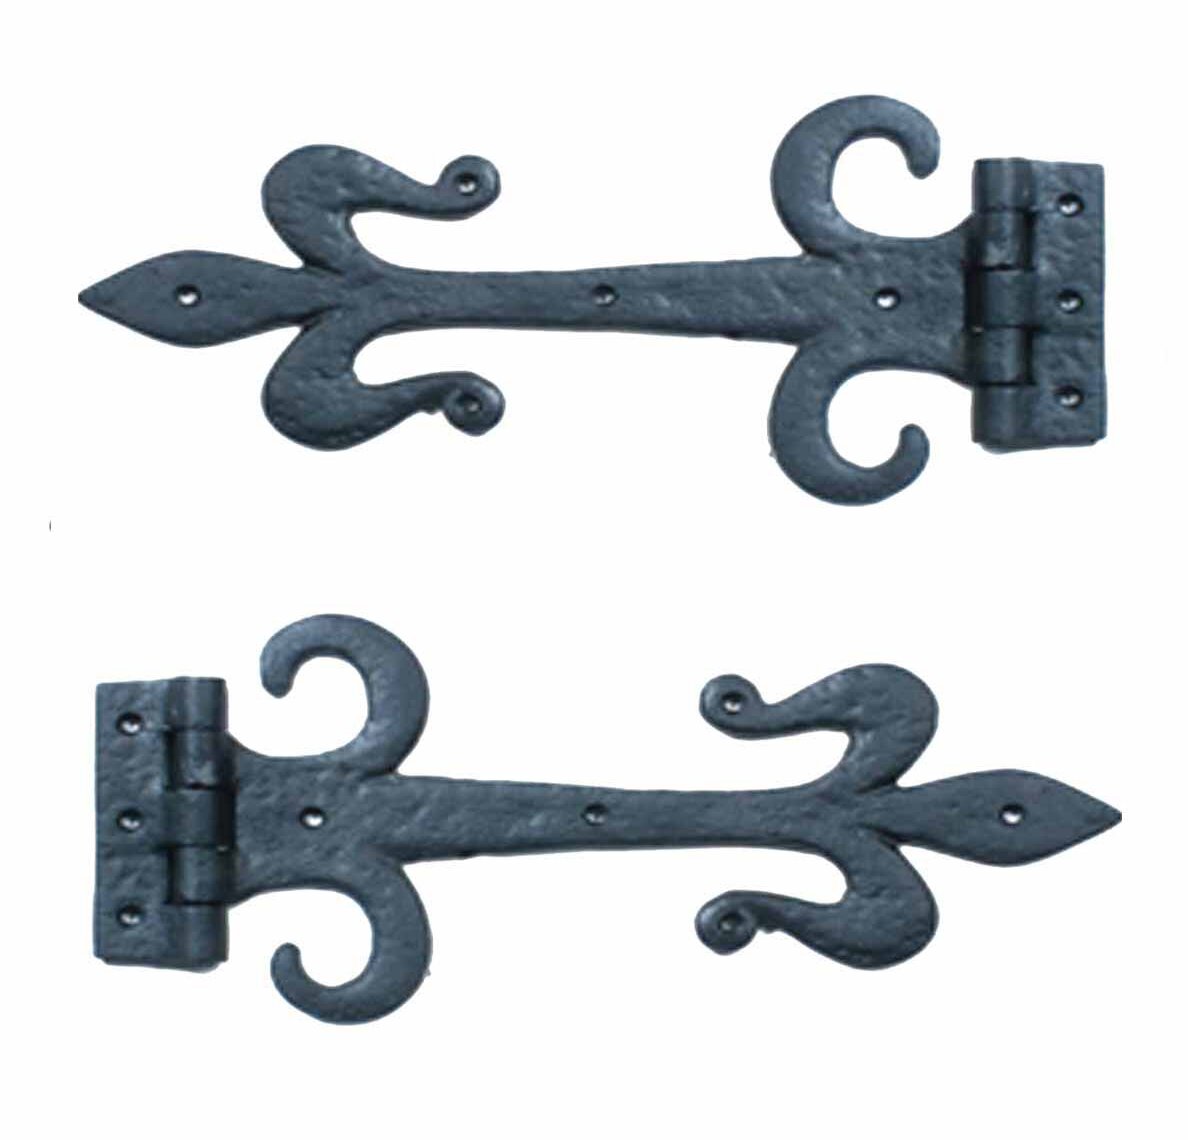 Iron Strap Hinge for Sale in Lancaster, PA